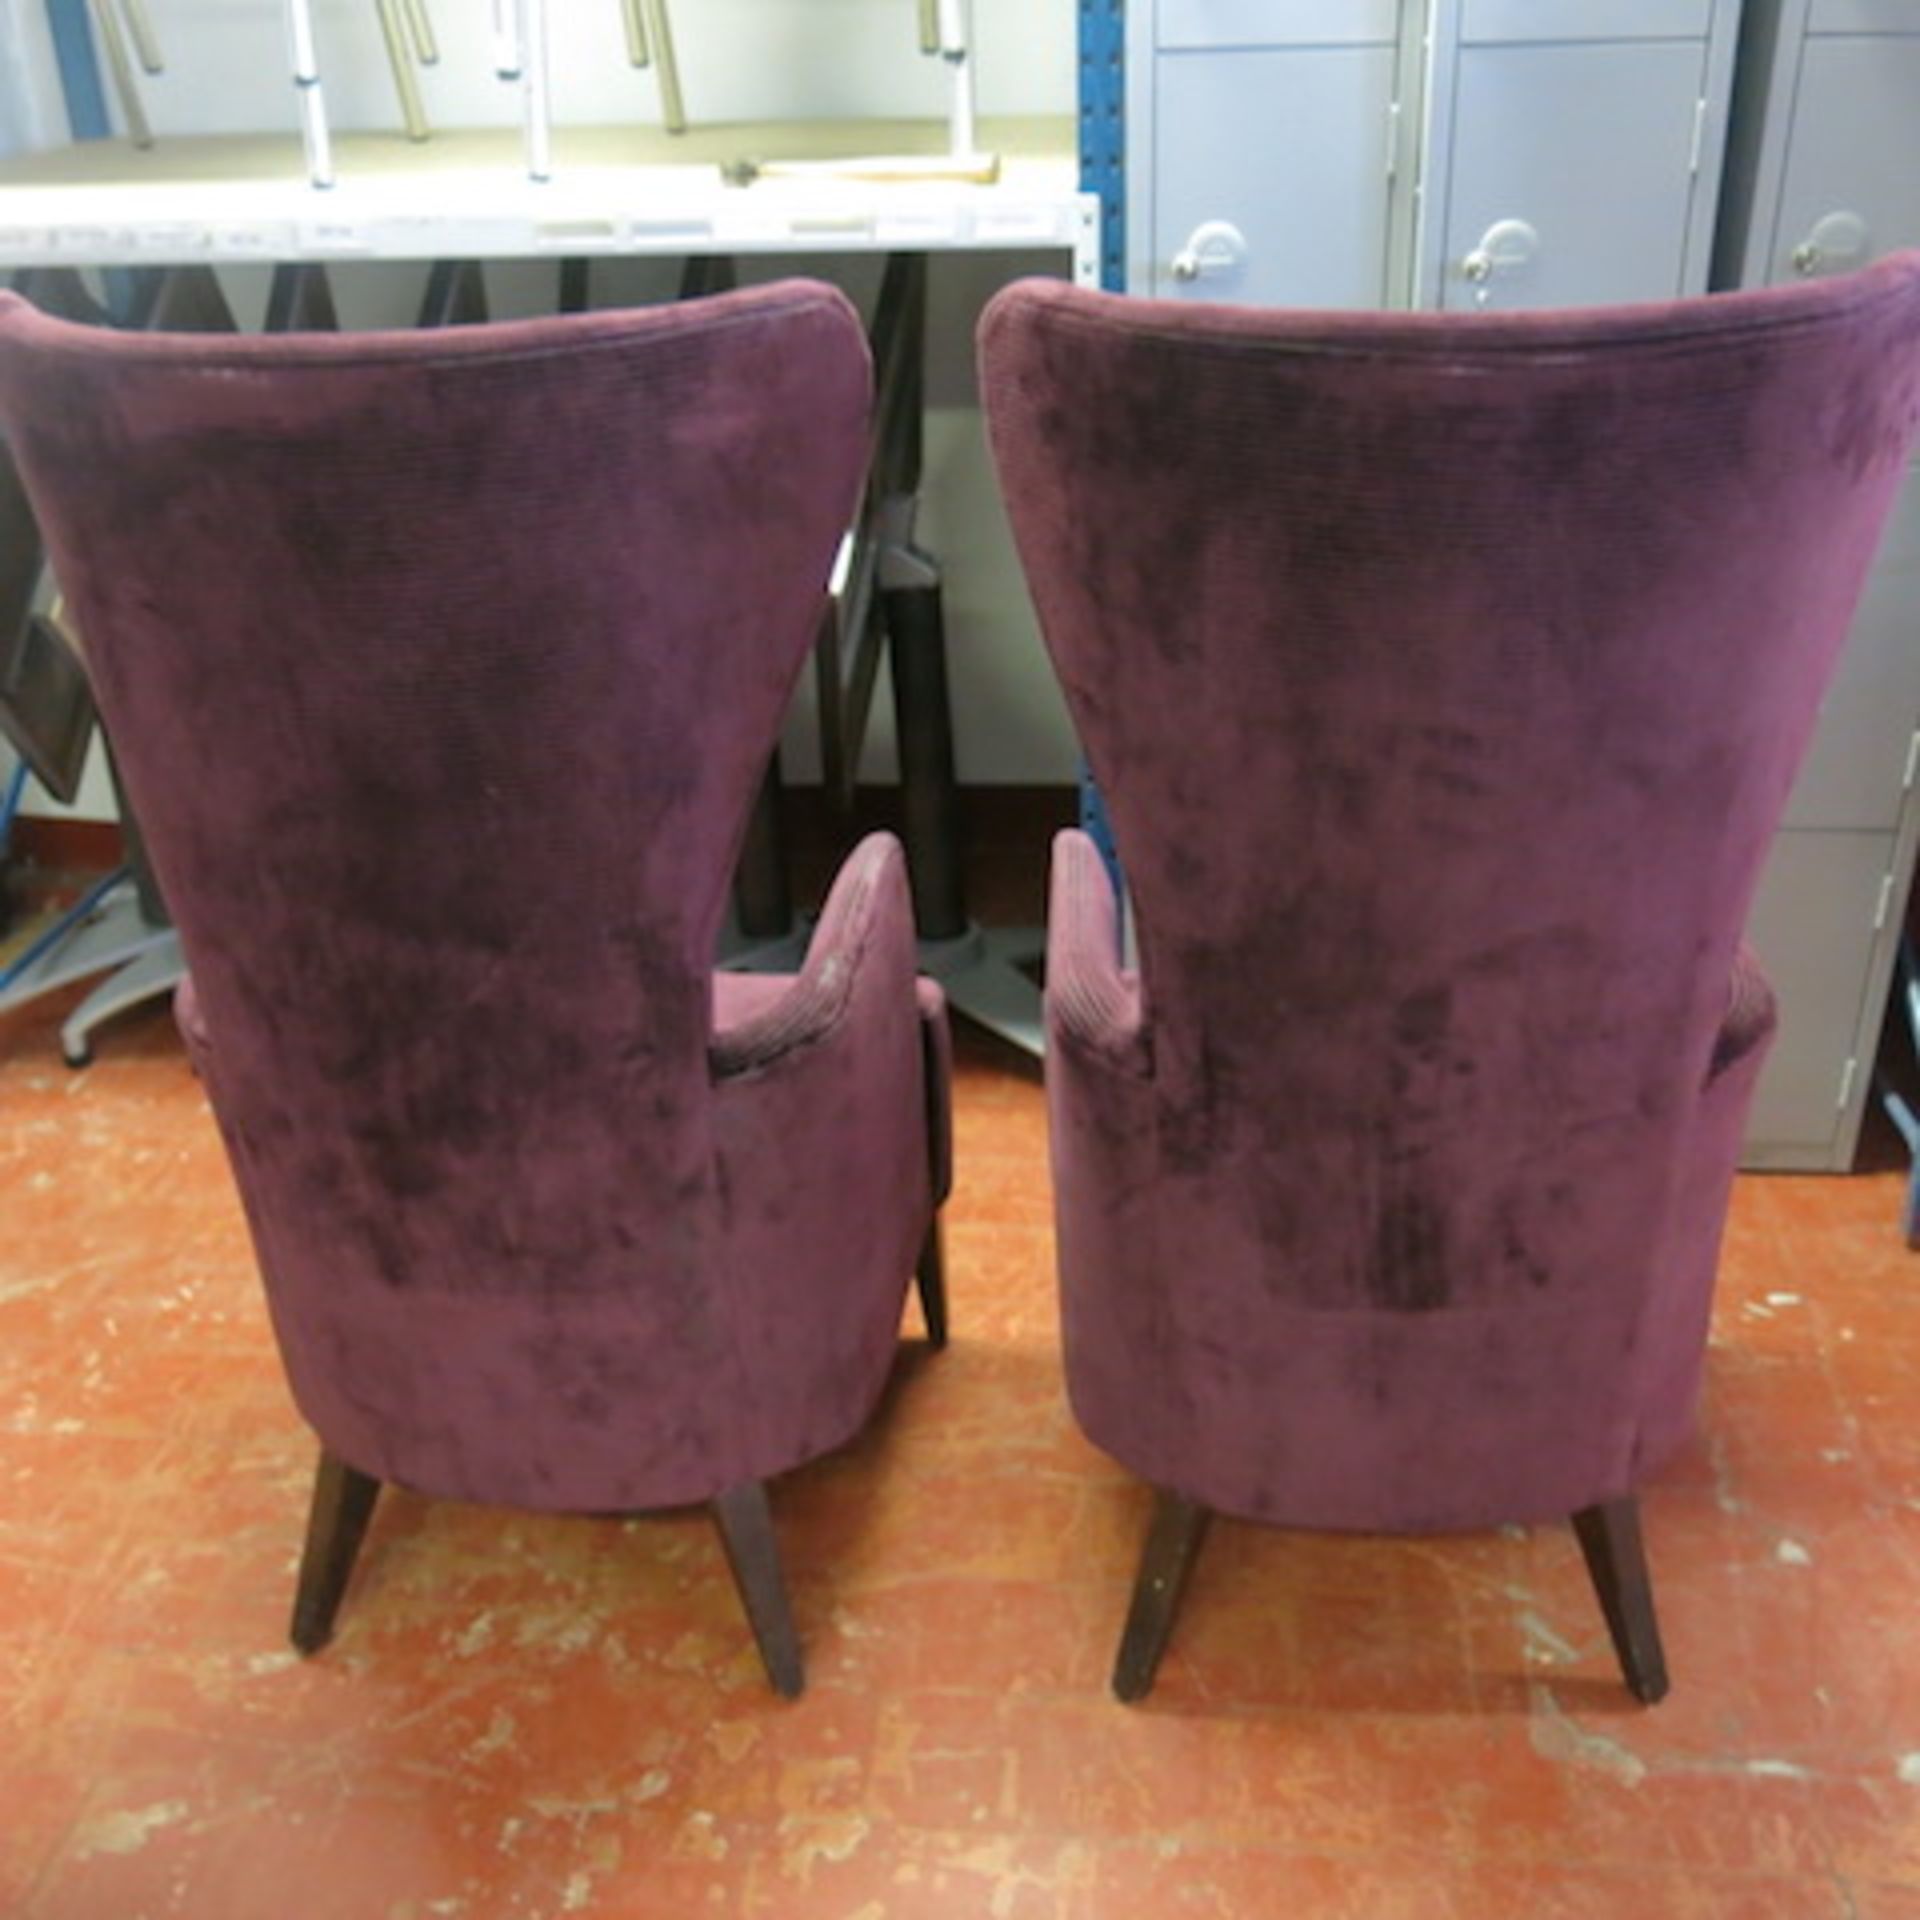 2 x Matching Crushed Velour Armchairs with Assorted Colour Striped Pattern and Plain Seat, Appears - Image 4 of 6